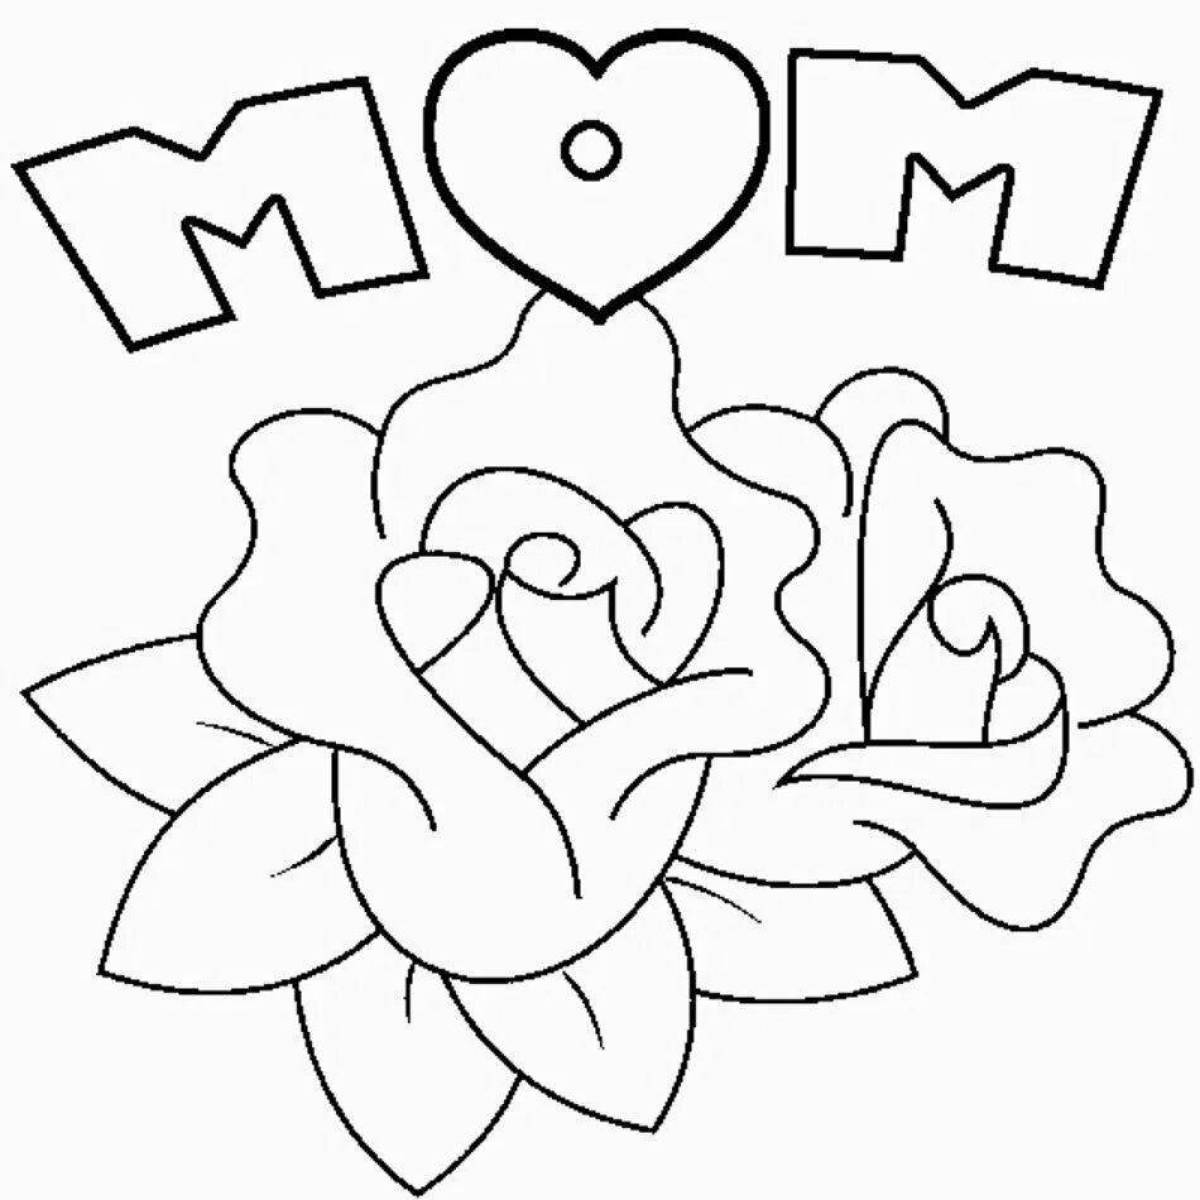 Glowing coloring book for mom from daughter